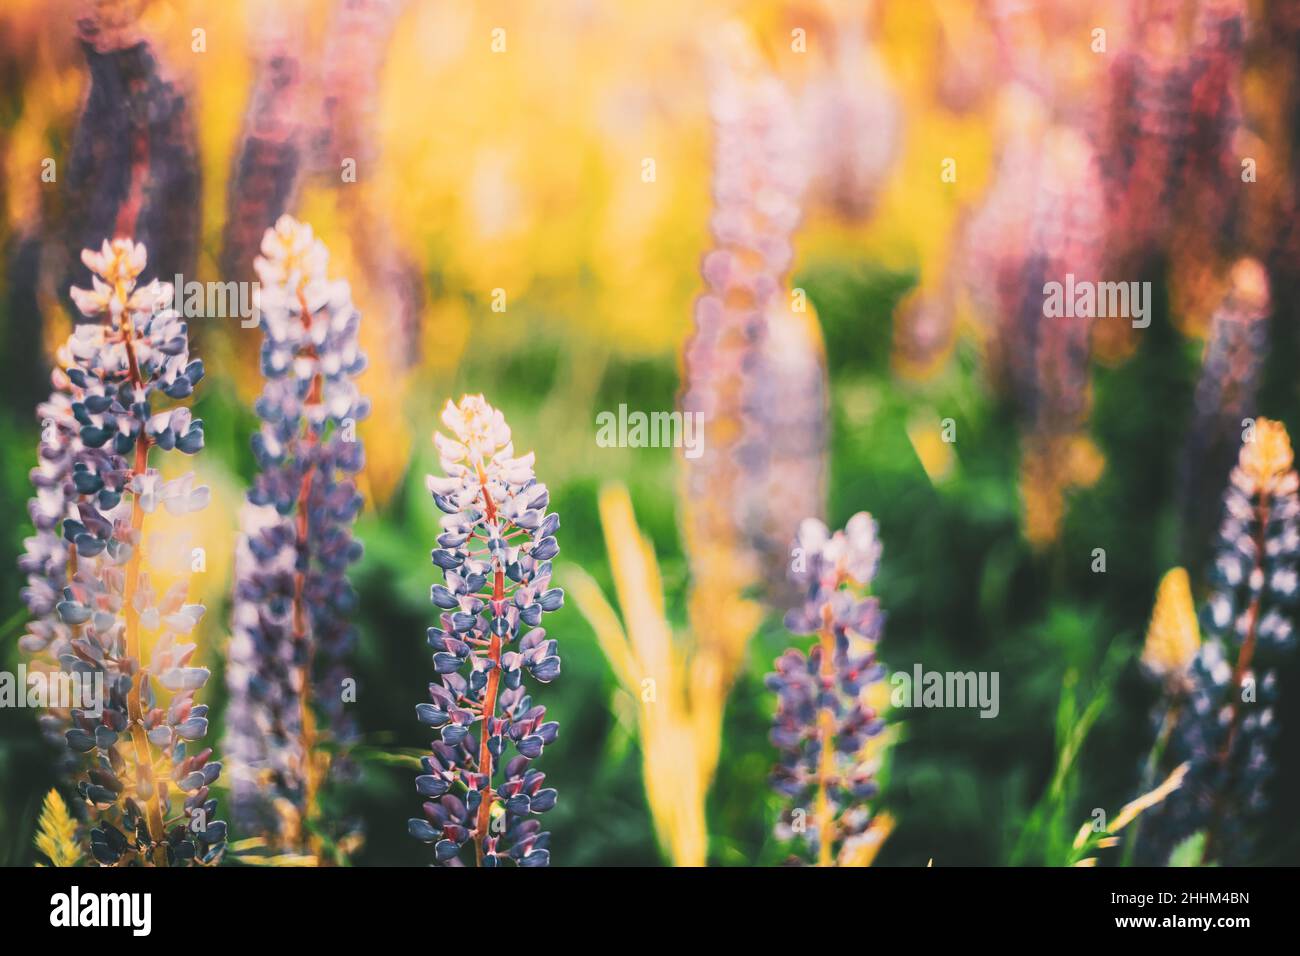 Bush Of Wild Flowers Lupine In Summer Field Meadow. Lupinus, Commonly Known As Lupin Or Lupine, Is A Genus Of Flowering Plants In The Legume Family Stock Photo